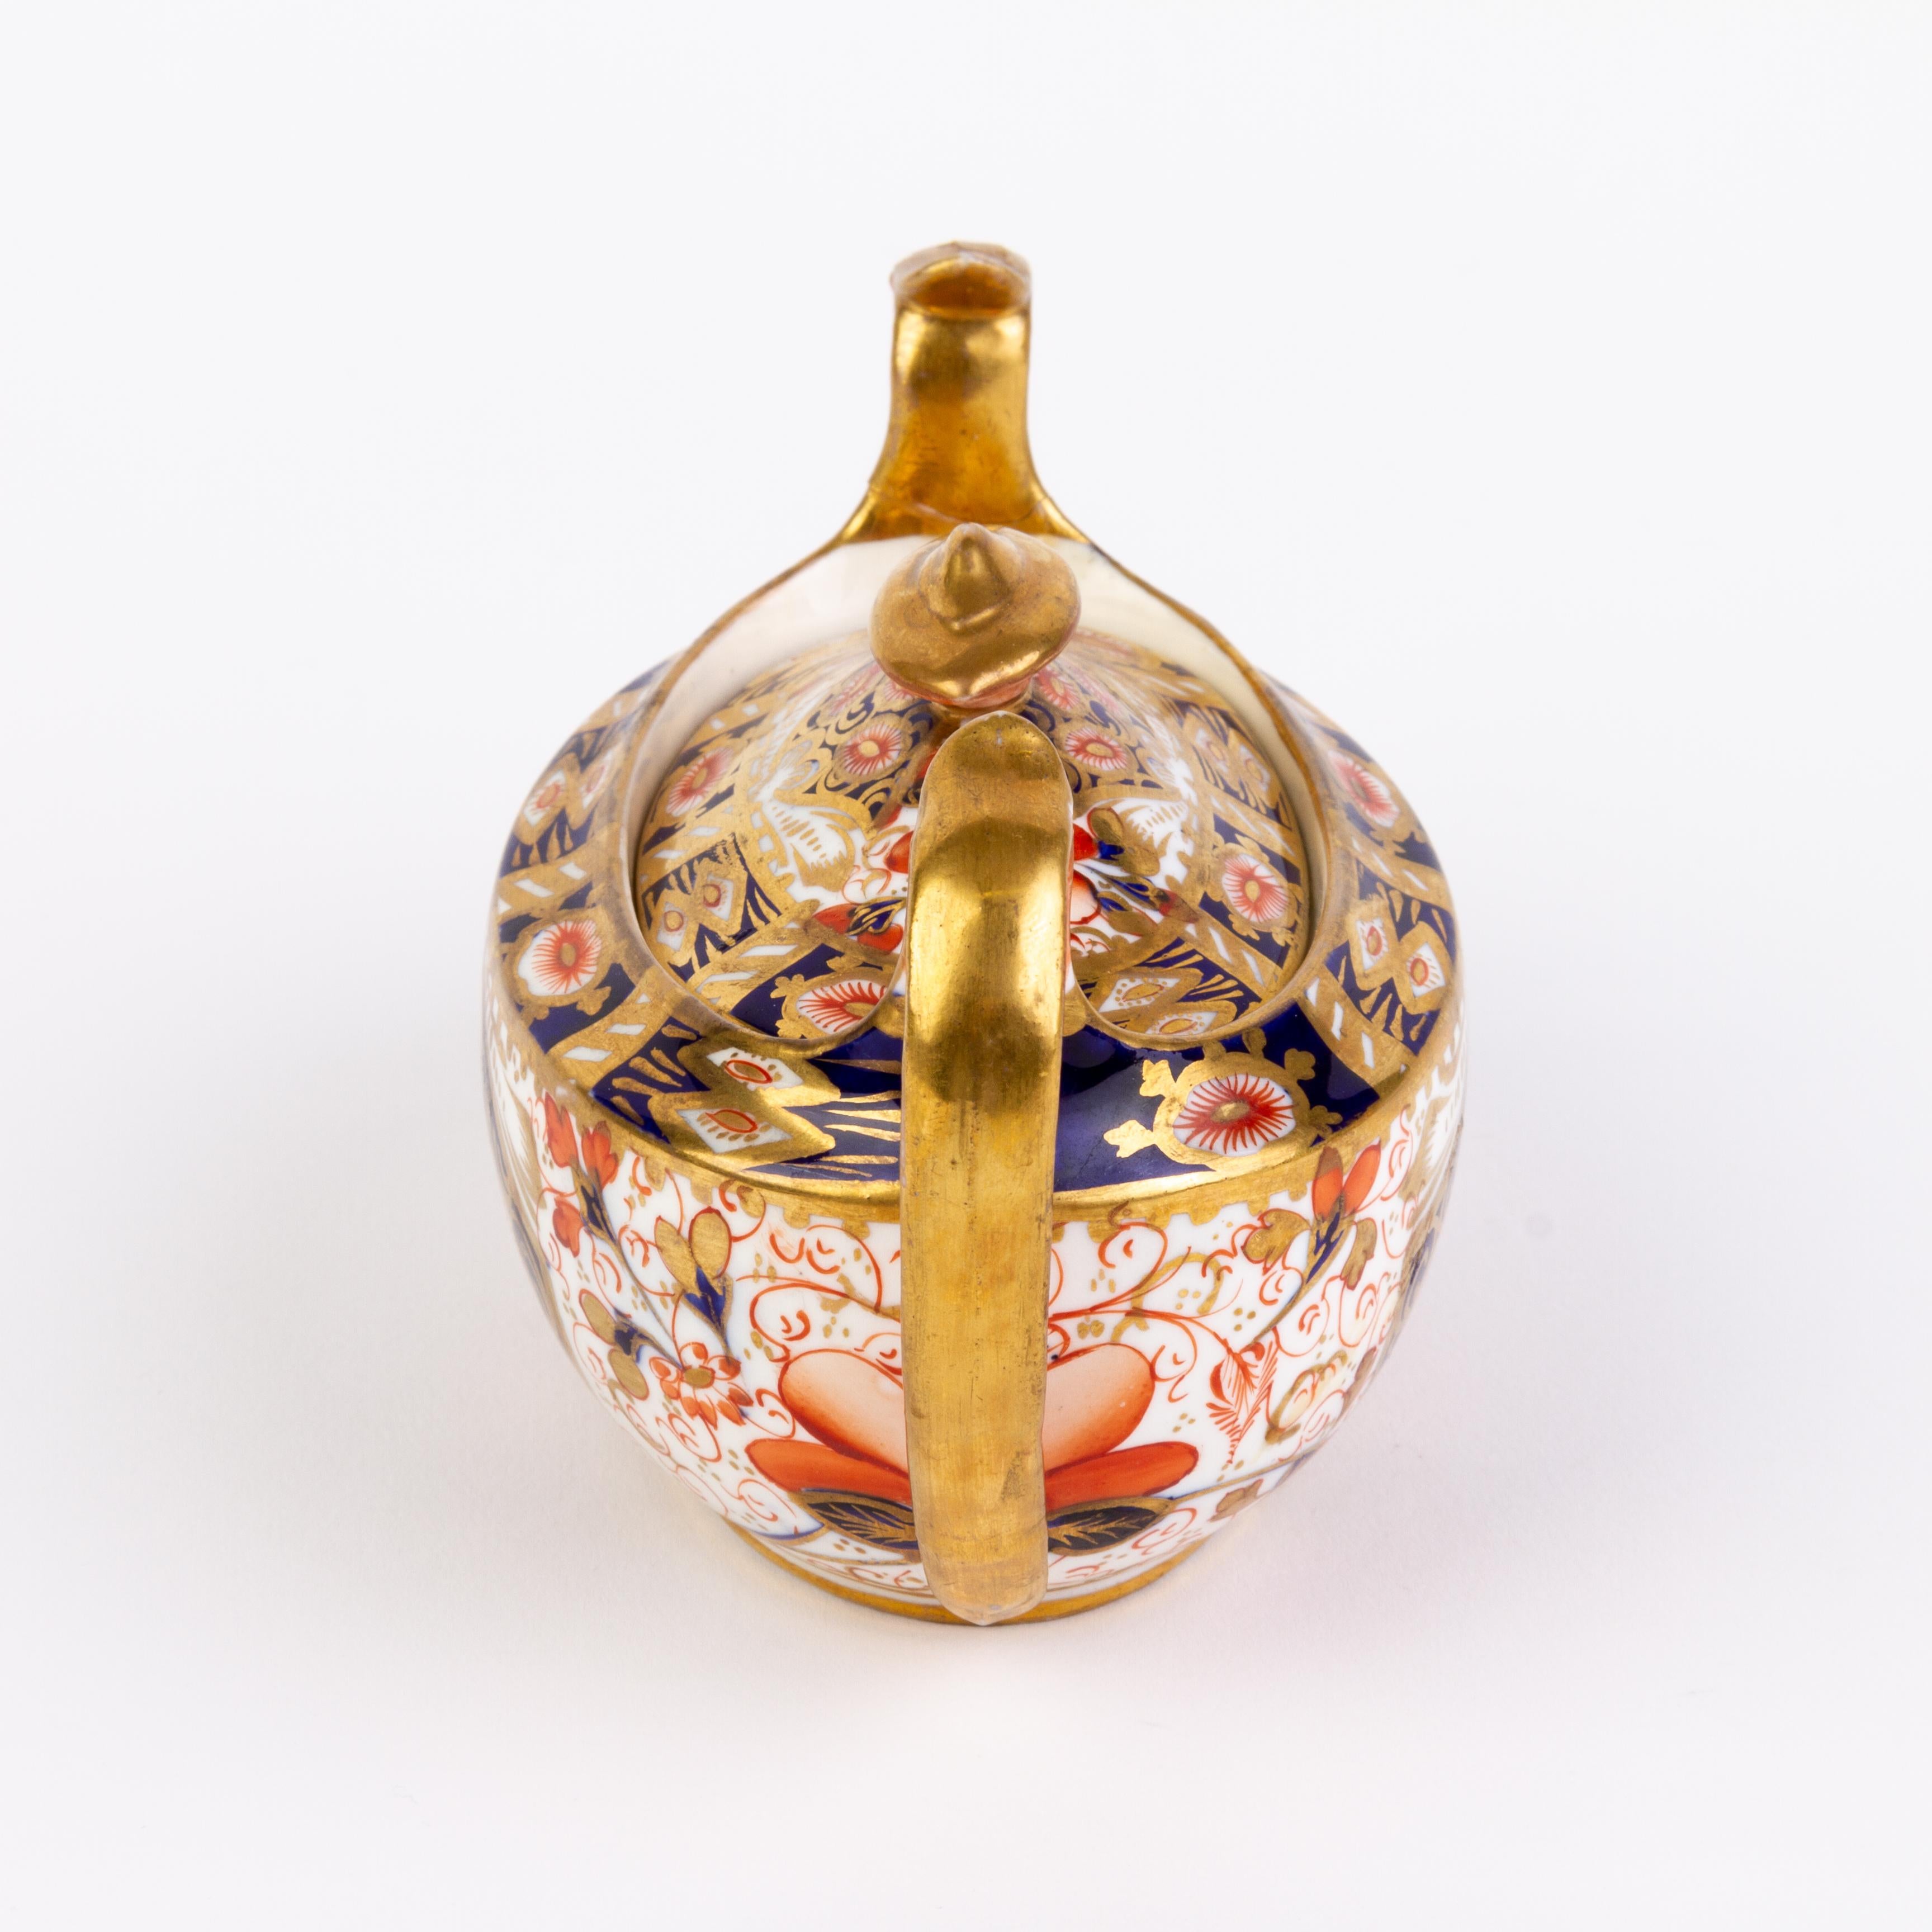 English Royal Crown Derby Imari Fine Gilt Porcelain Lidded Sugar Bowl
Good condition, as seen
From a private collection
Free international shipping.